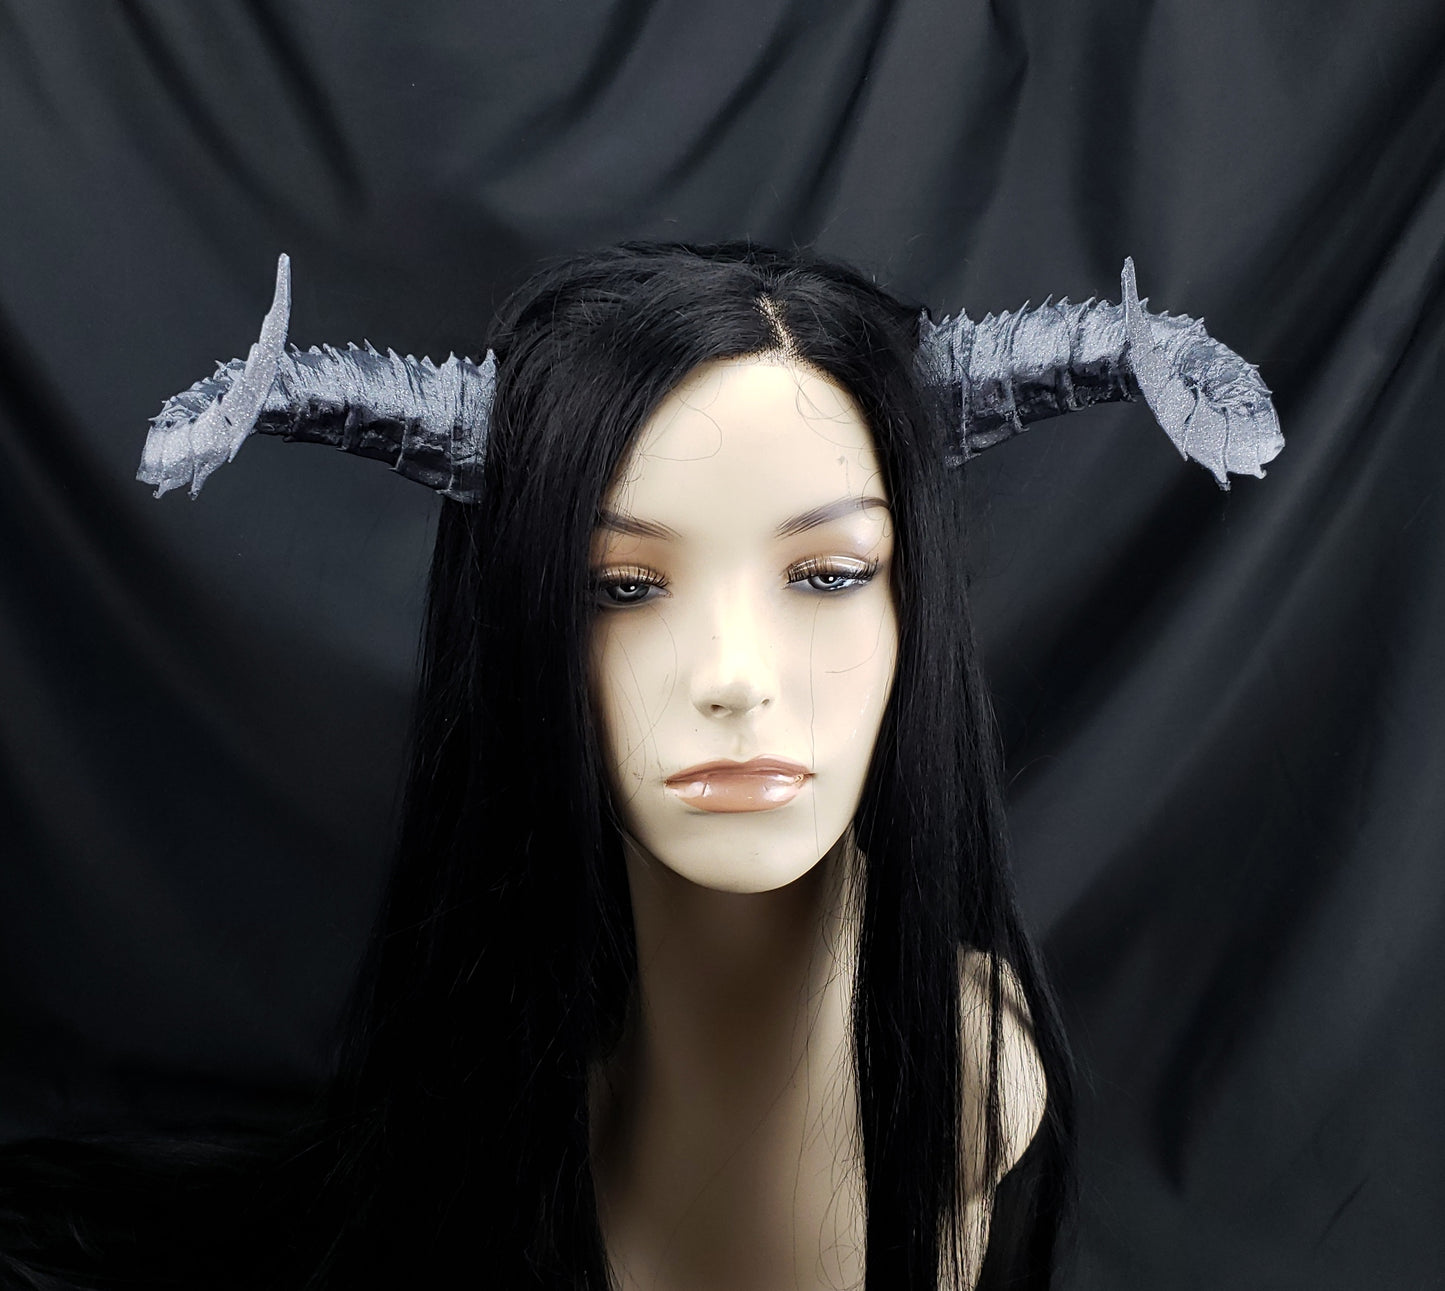 Dragon, Demon, Medium Costume or Cosplay Horns- Made to Order